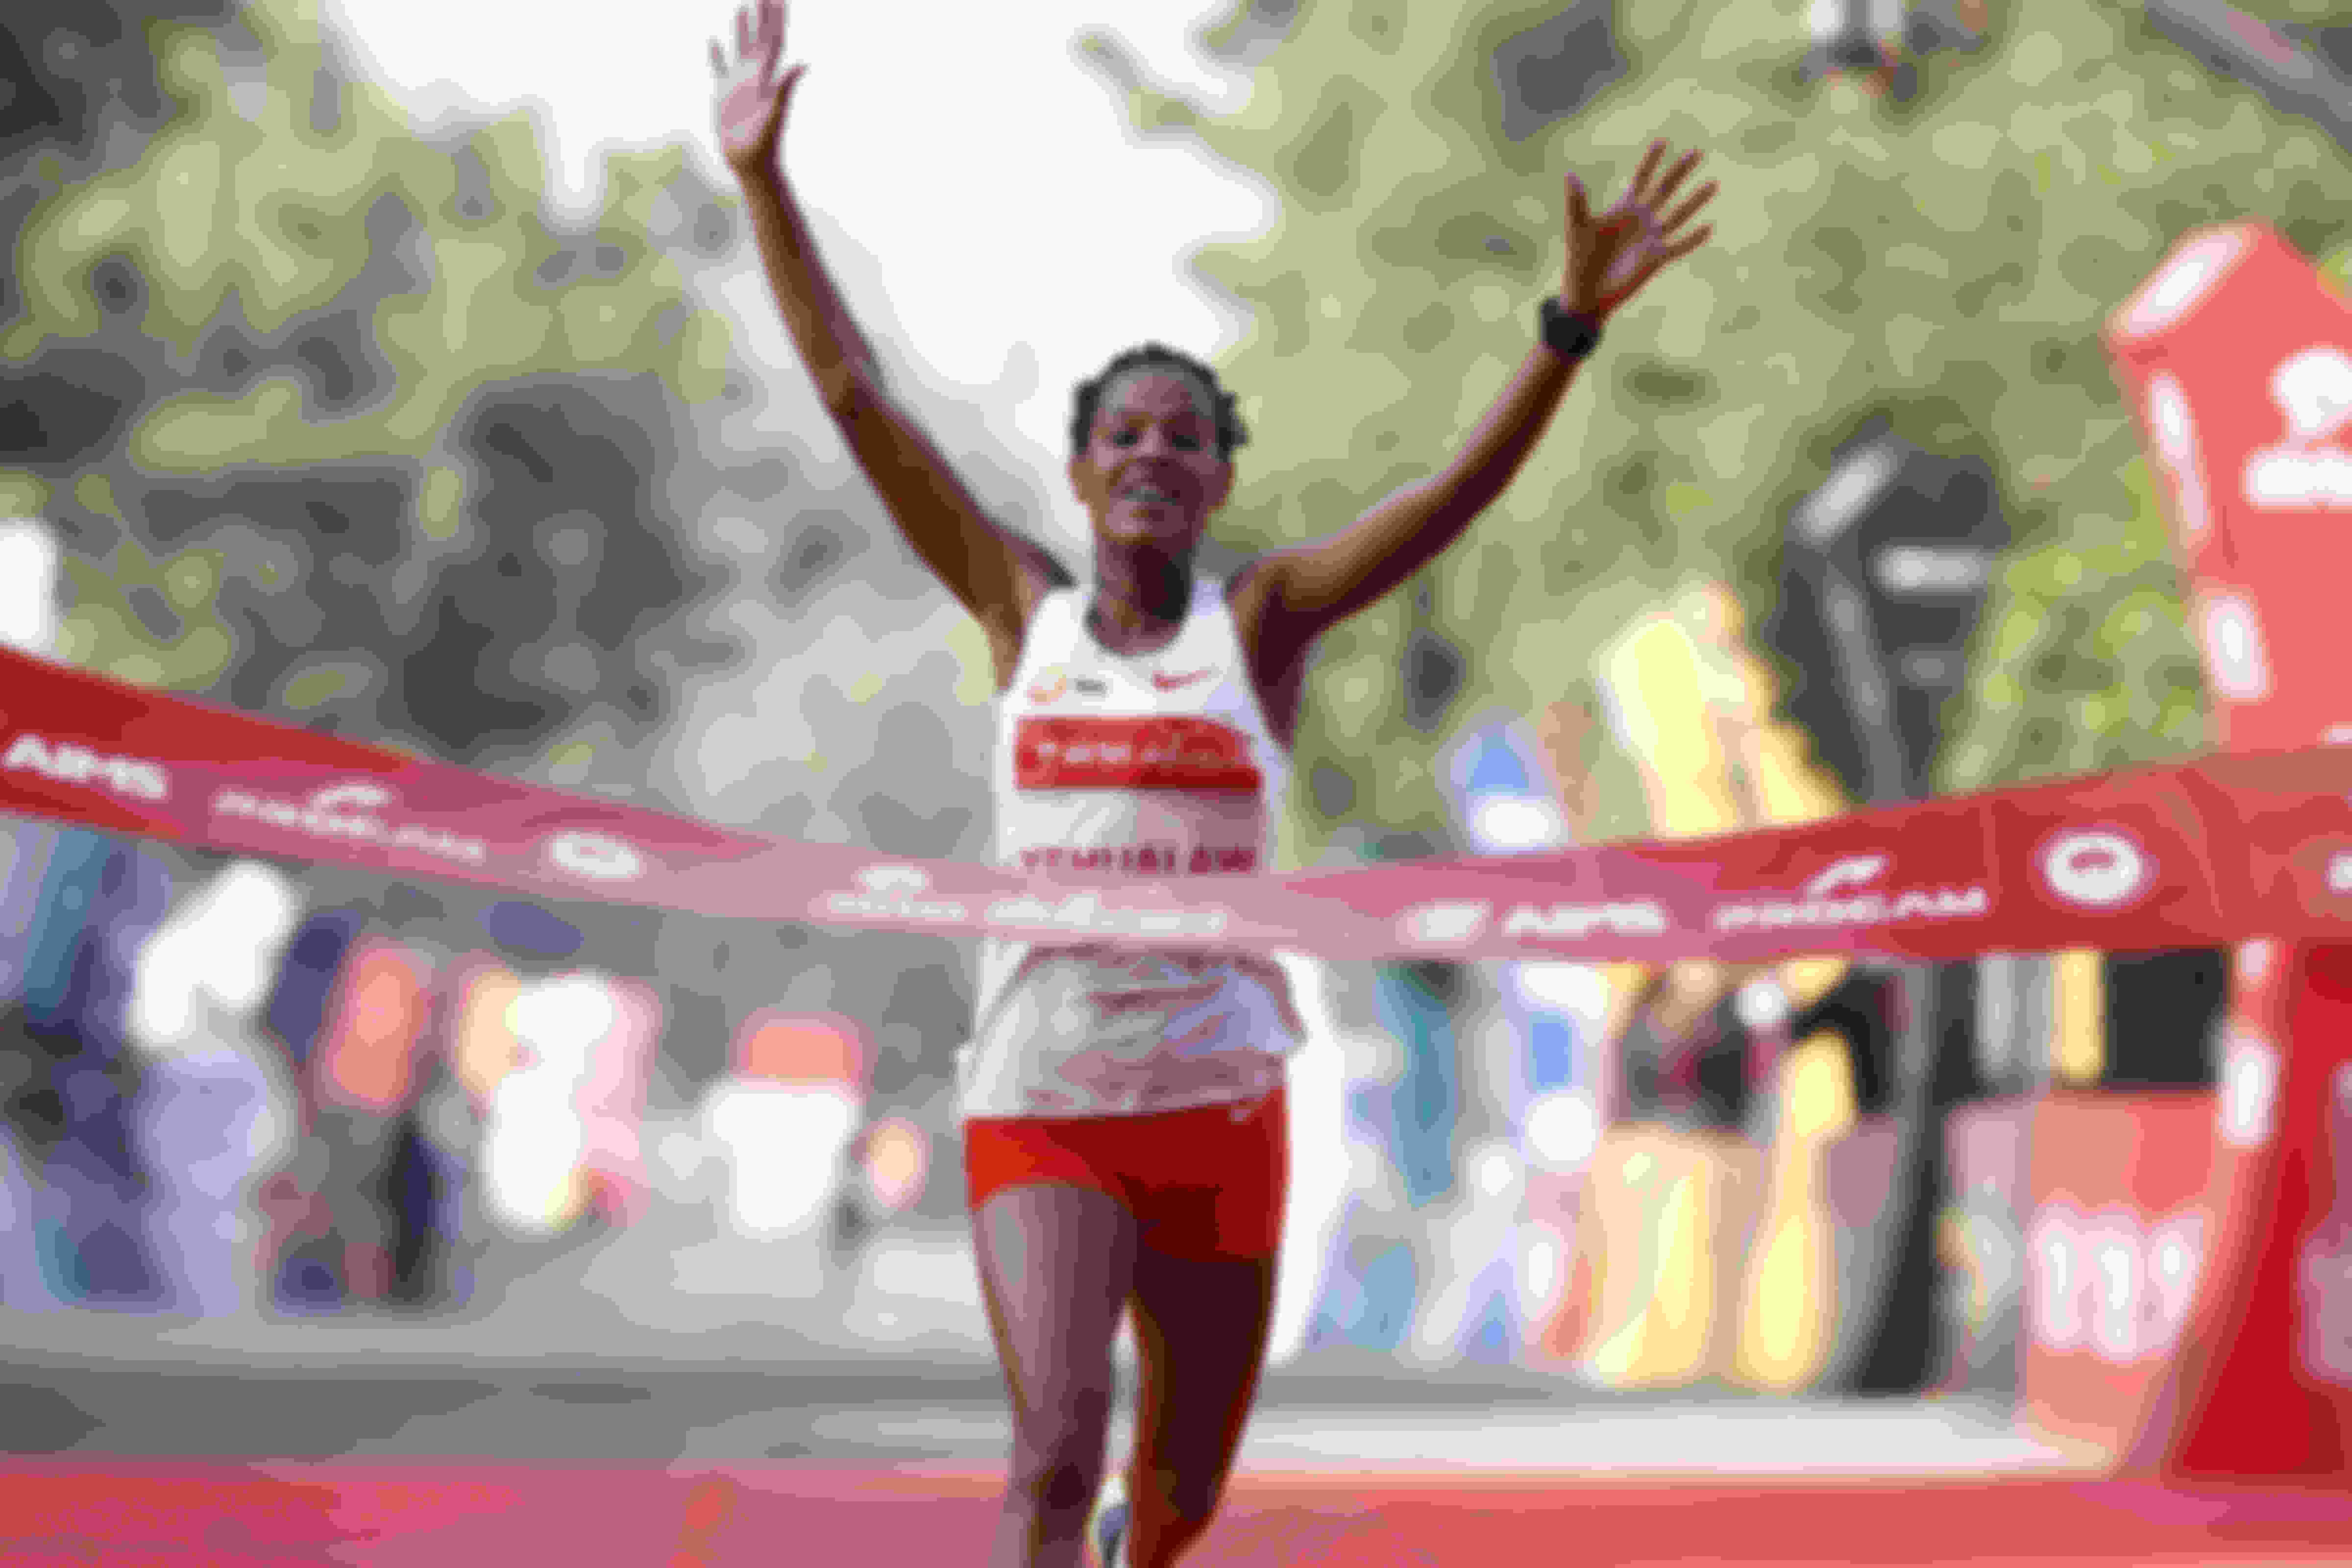 Yelamzerf Yehualaw set a new course record en route her win at the 202 Airtel Delhi Half Marathon. Photo: ADHM Media